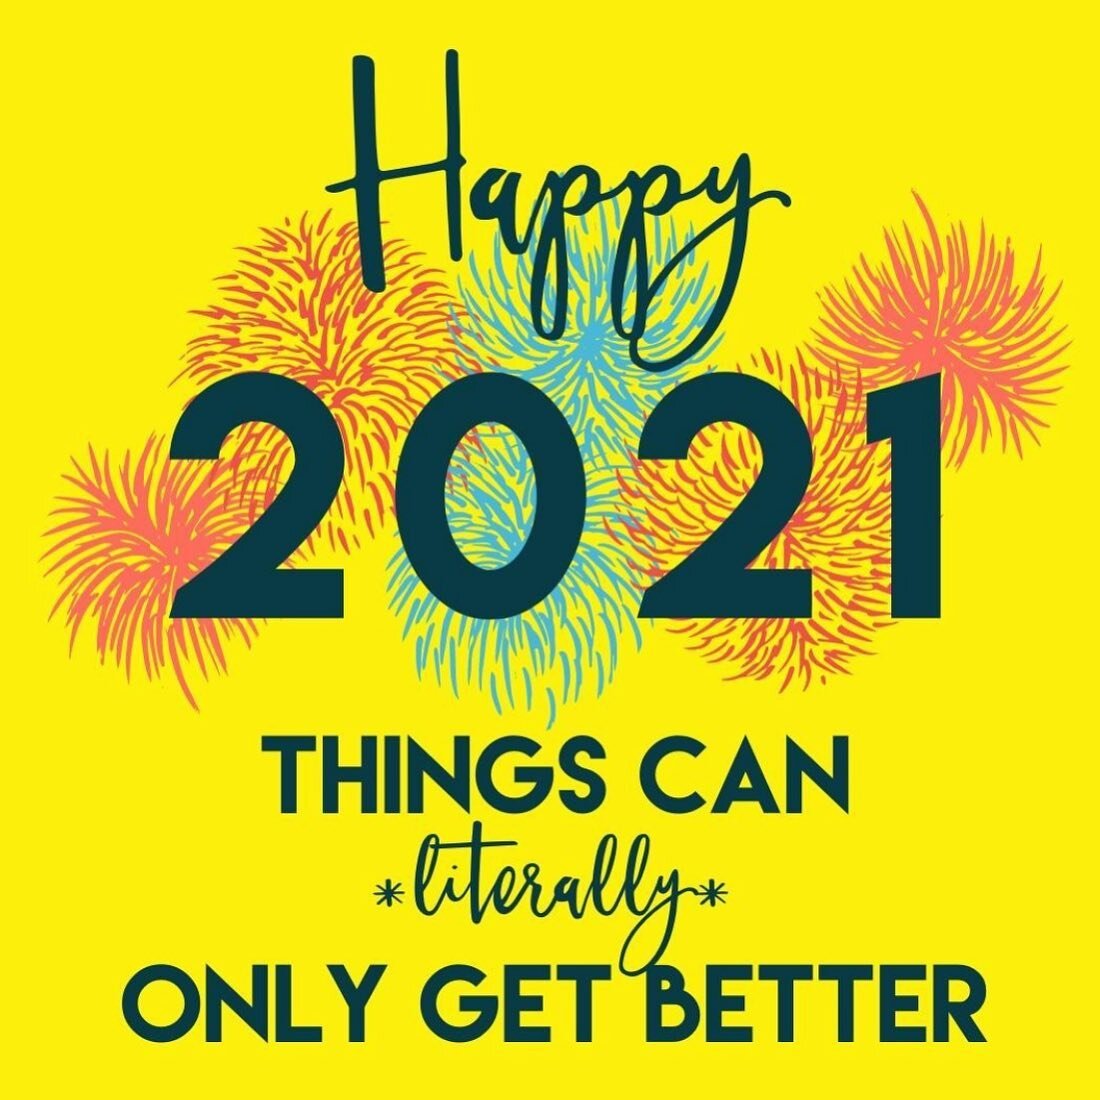 HAPPY NEW YEAR!⁠
⁠
We're a pretty optimistic bunch here at TVT, but even we have to concede that was one hell of a shitter of a year! ⁠
⁠
We truly wish you an amazing 2021 (though we'd settle just for better!)⁠
⁠